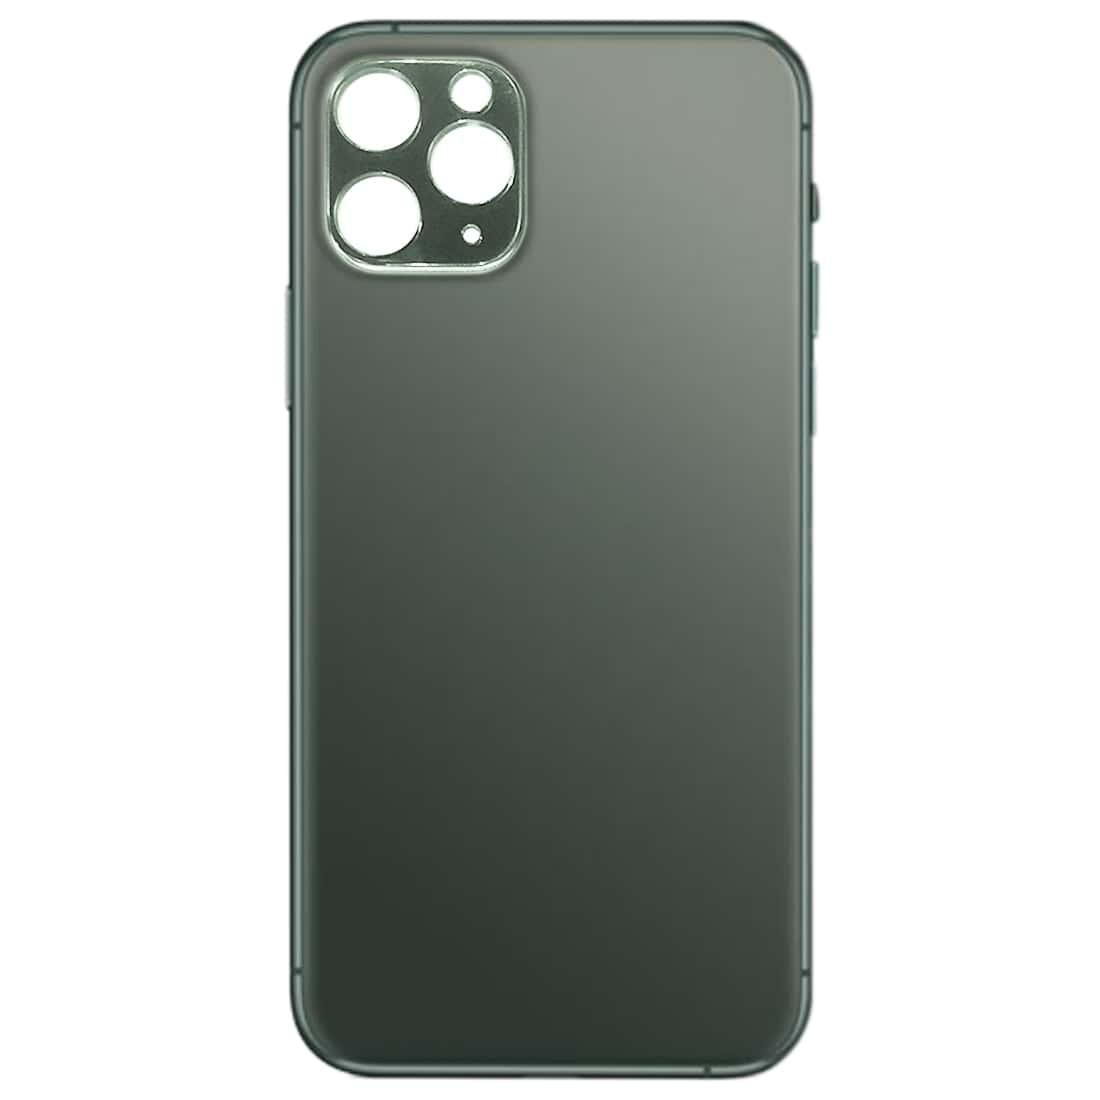 Back Glass Panel for  iPhone 11 Pro Max Green